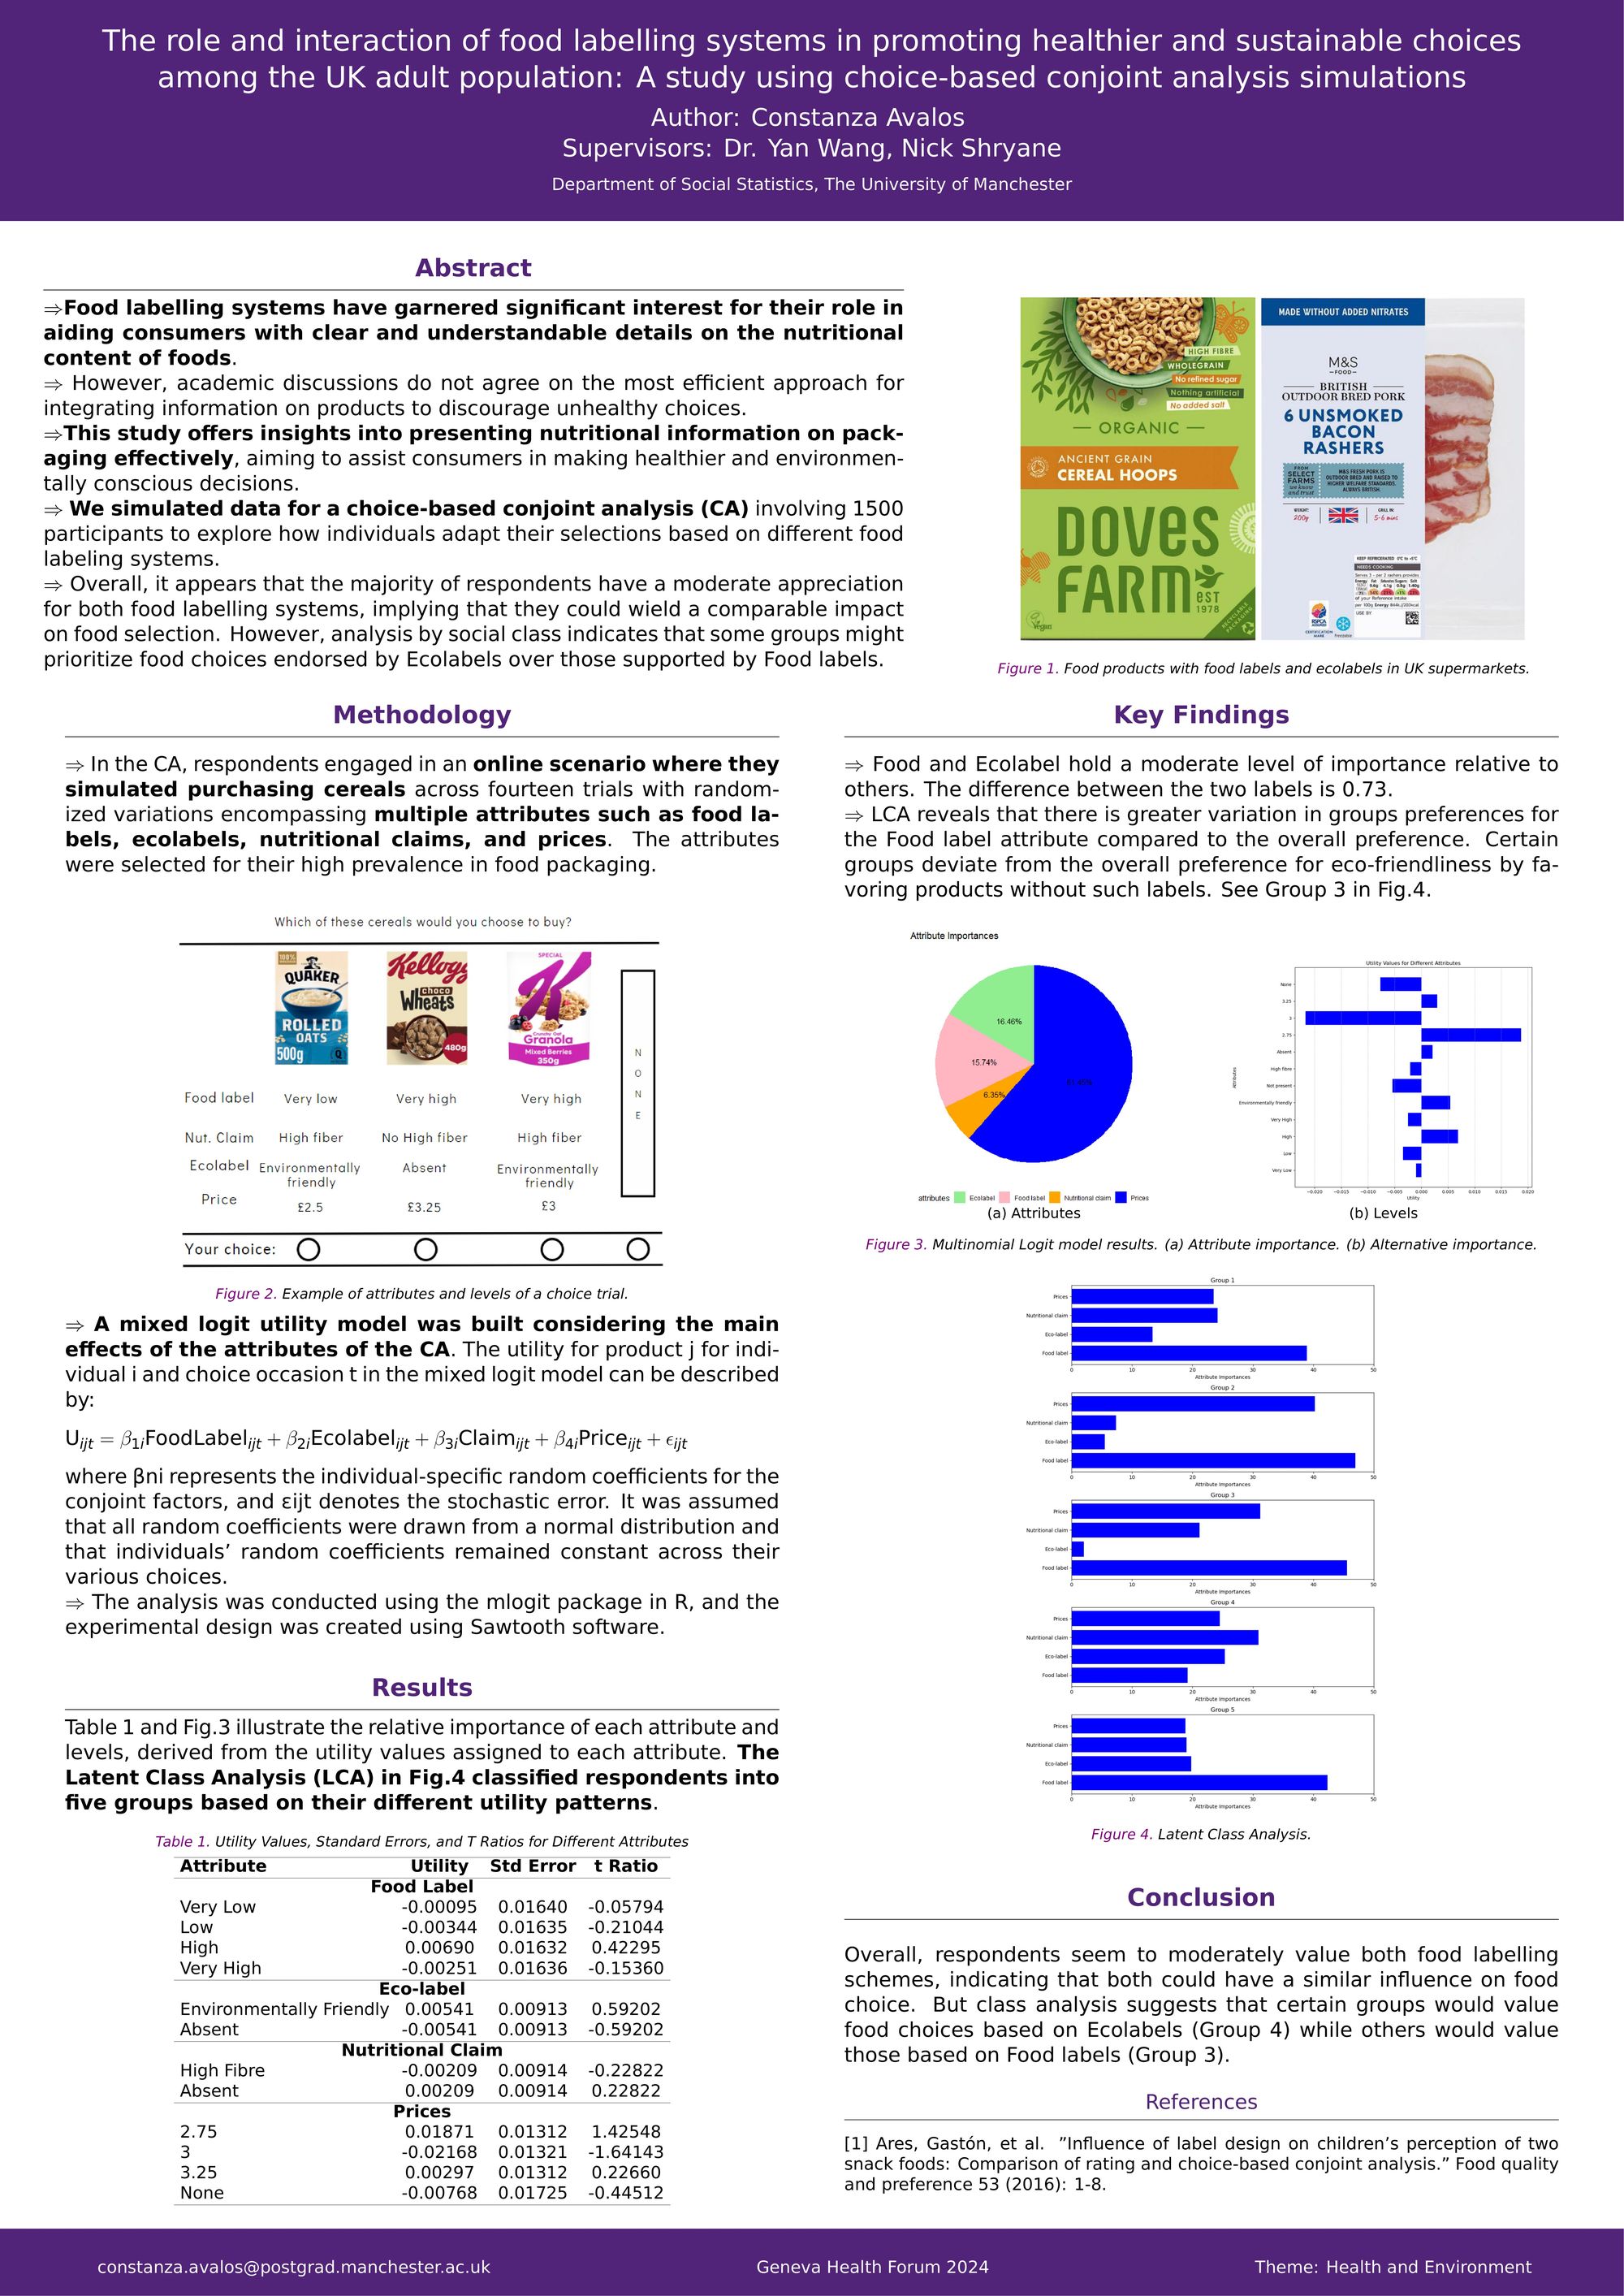 The role and interaction of food labelling systems in promoting healthier and sustainable choices among the UK adult population